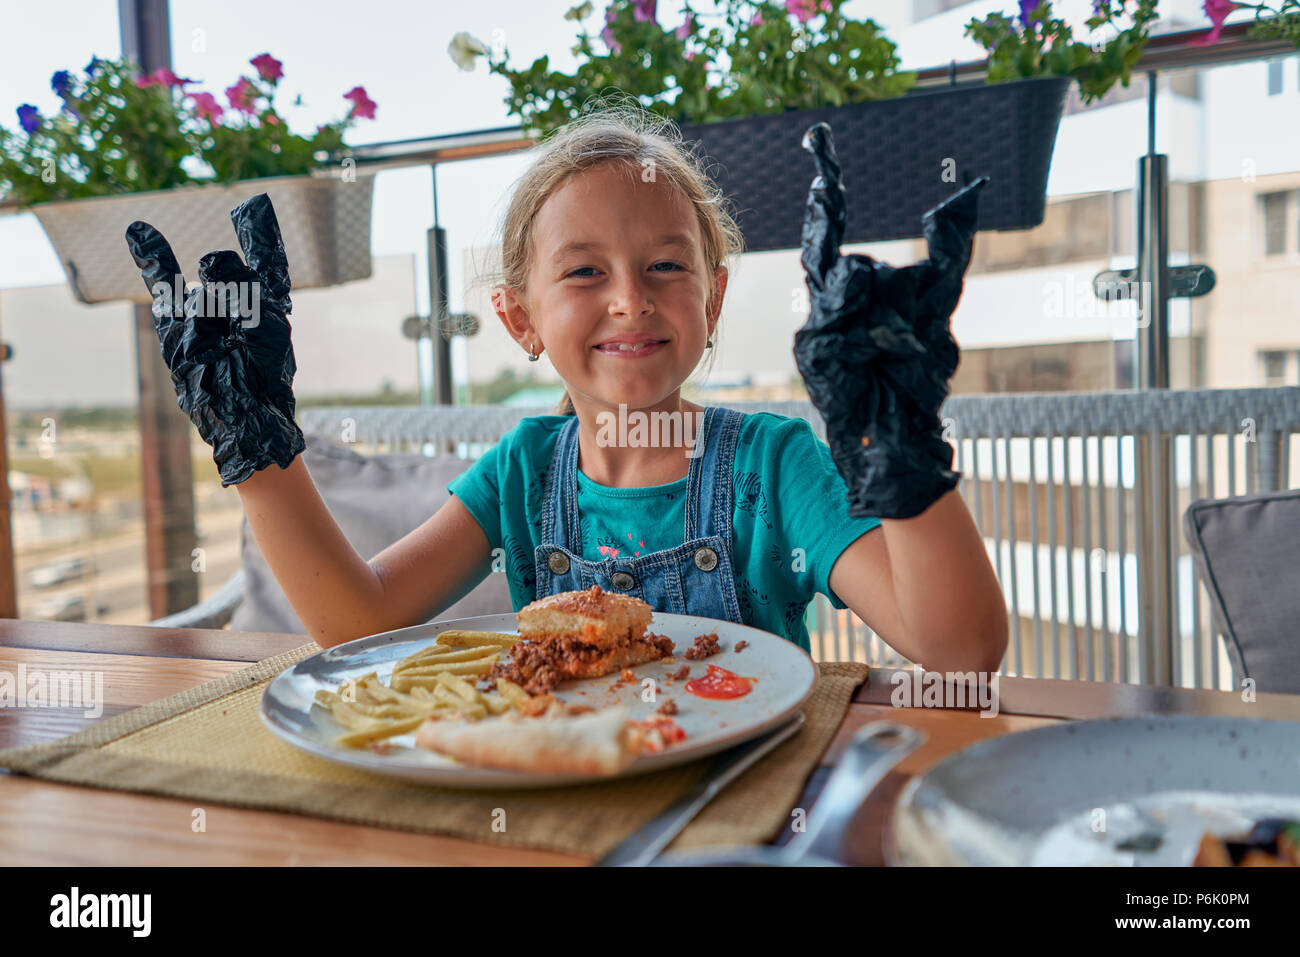 child eats a Burger in a restaurant Stock Photo